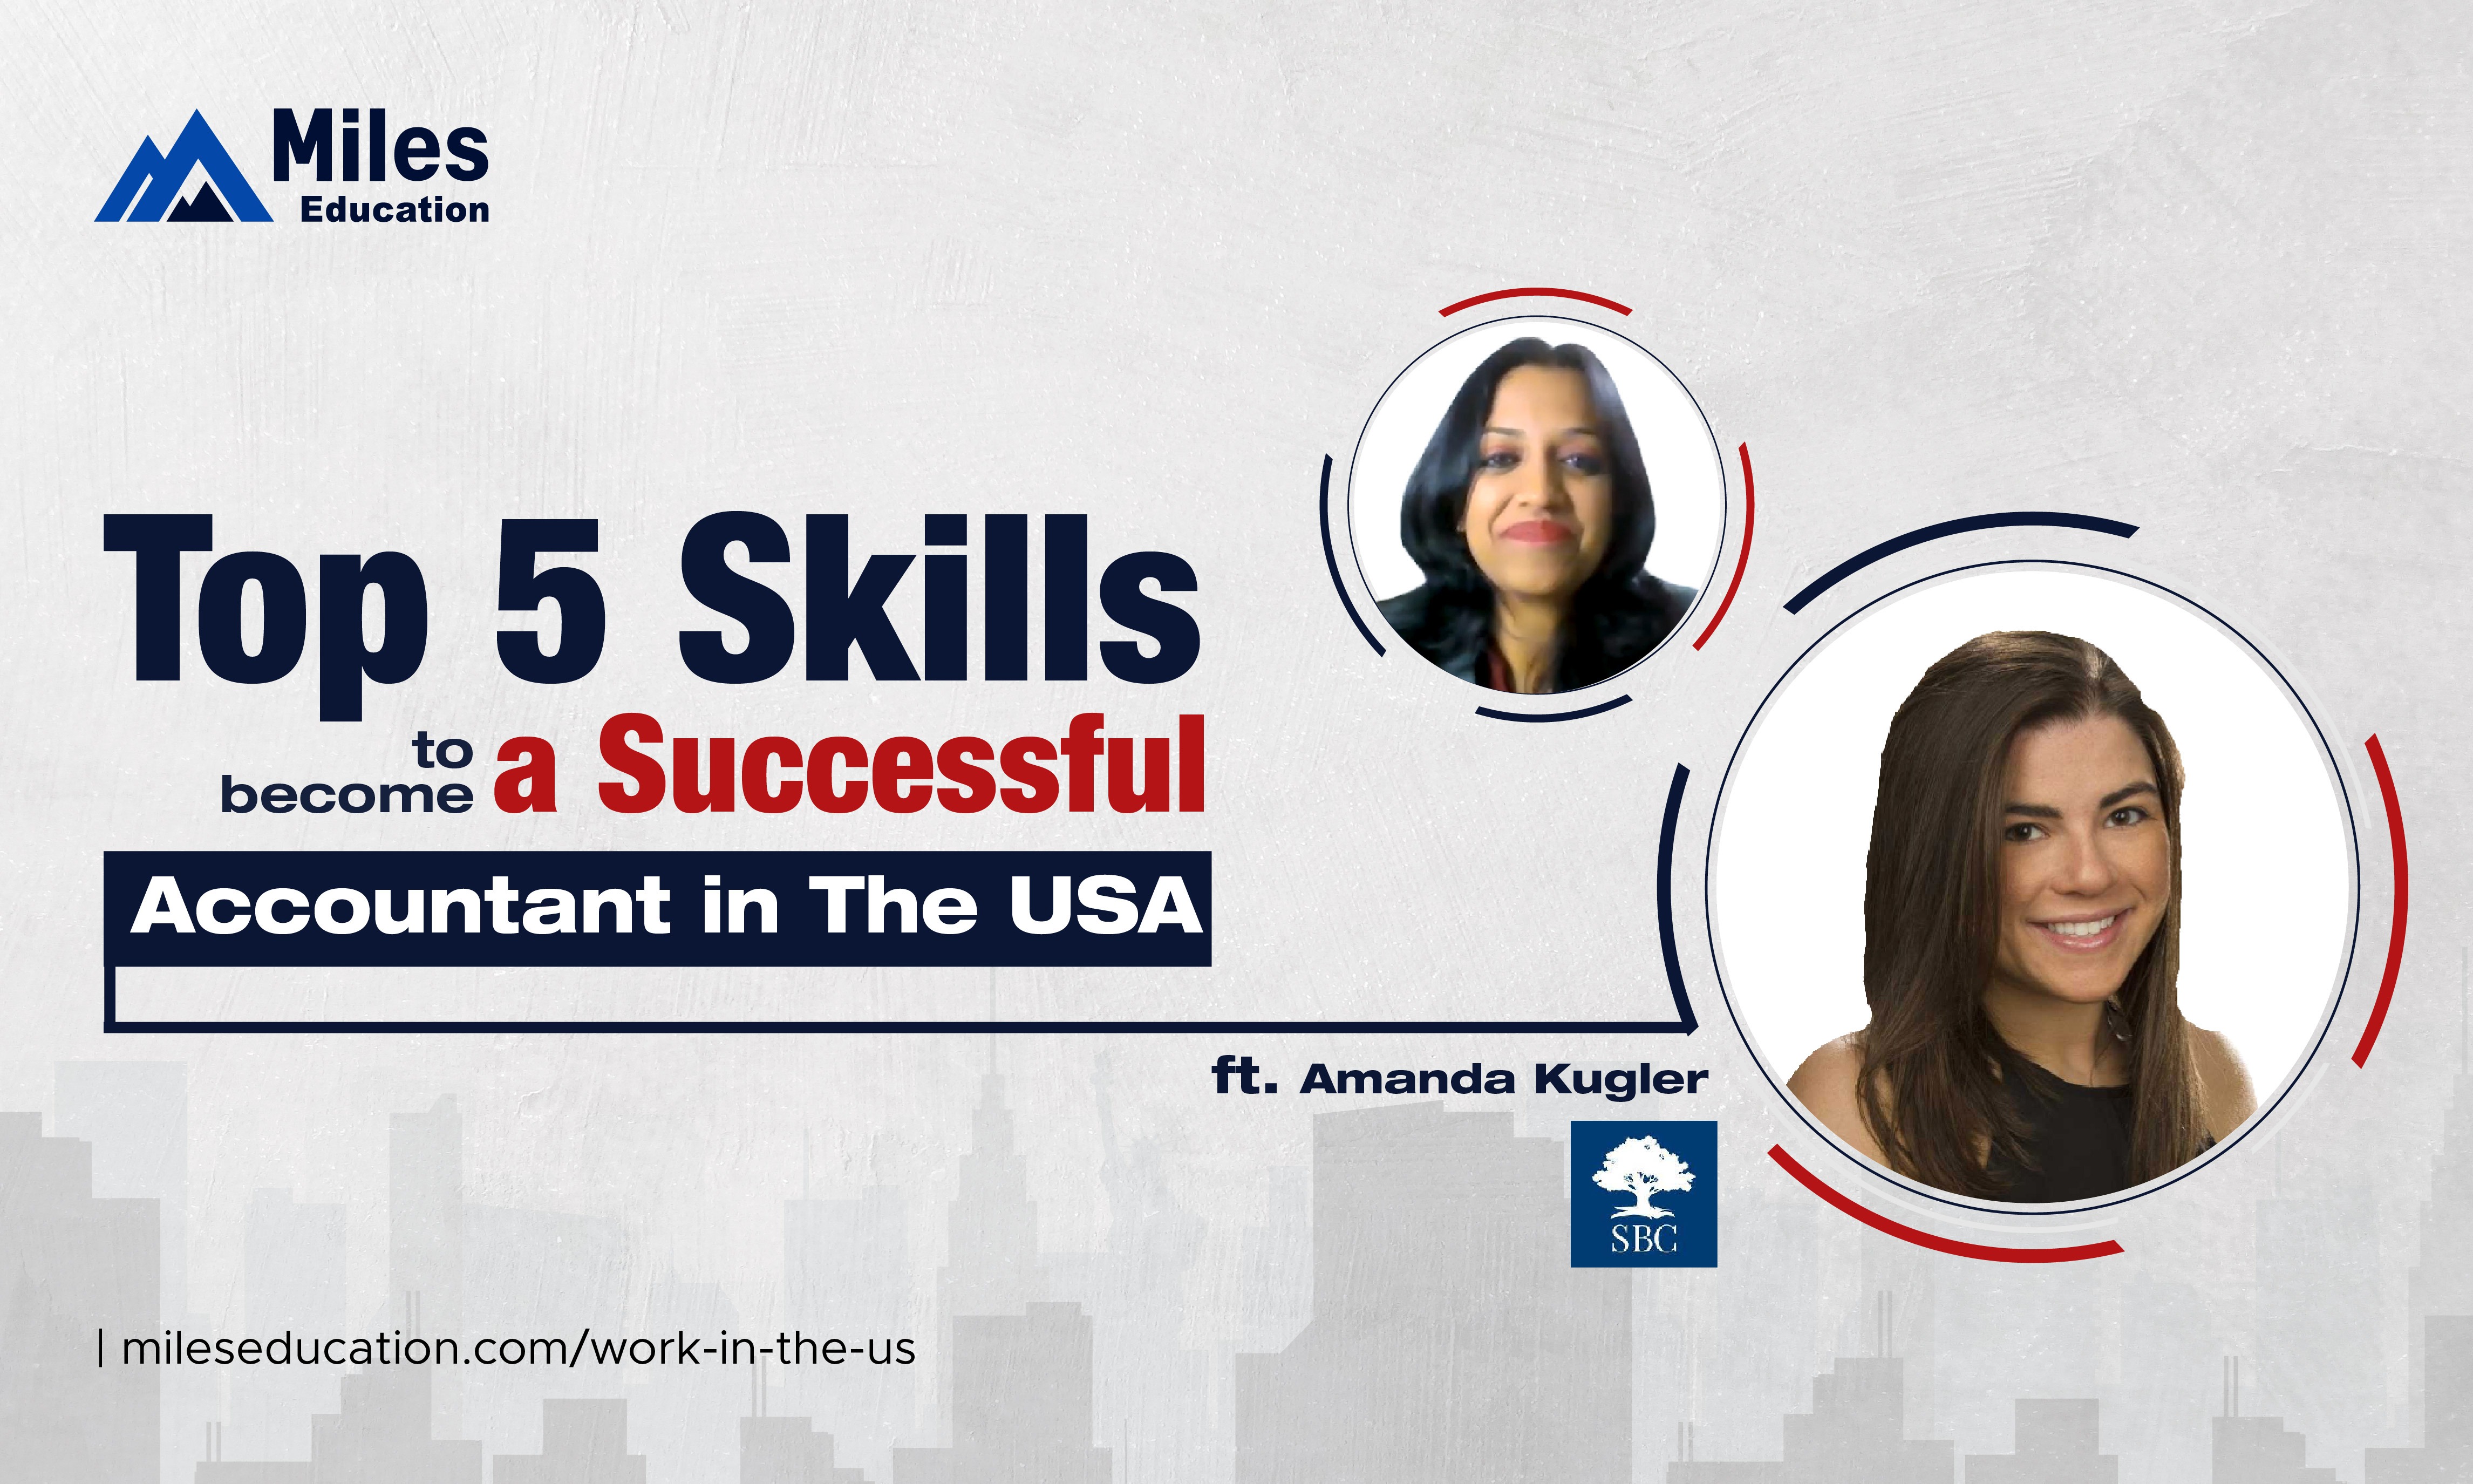 Top 5 skills to become a successful accountant in the USA